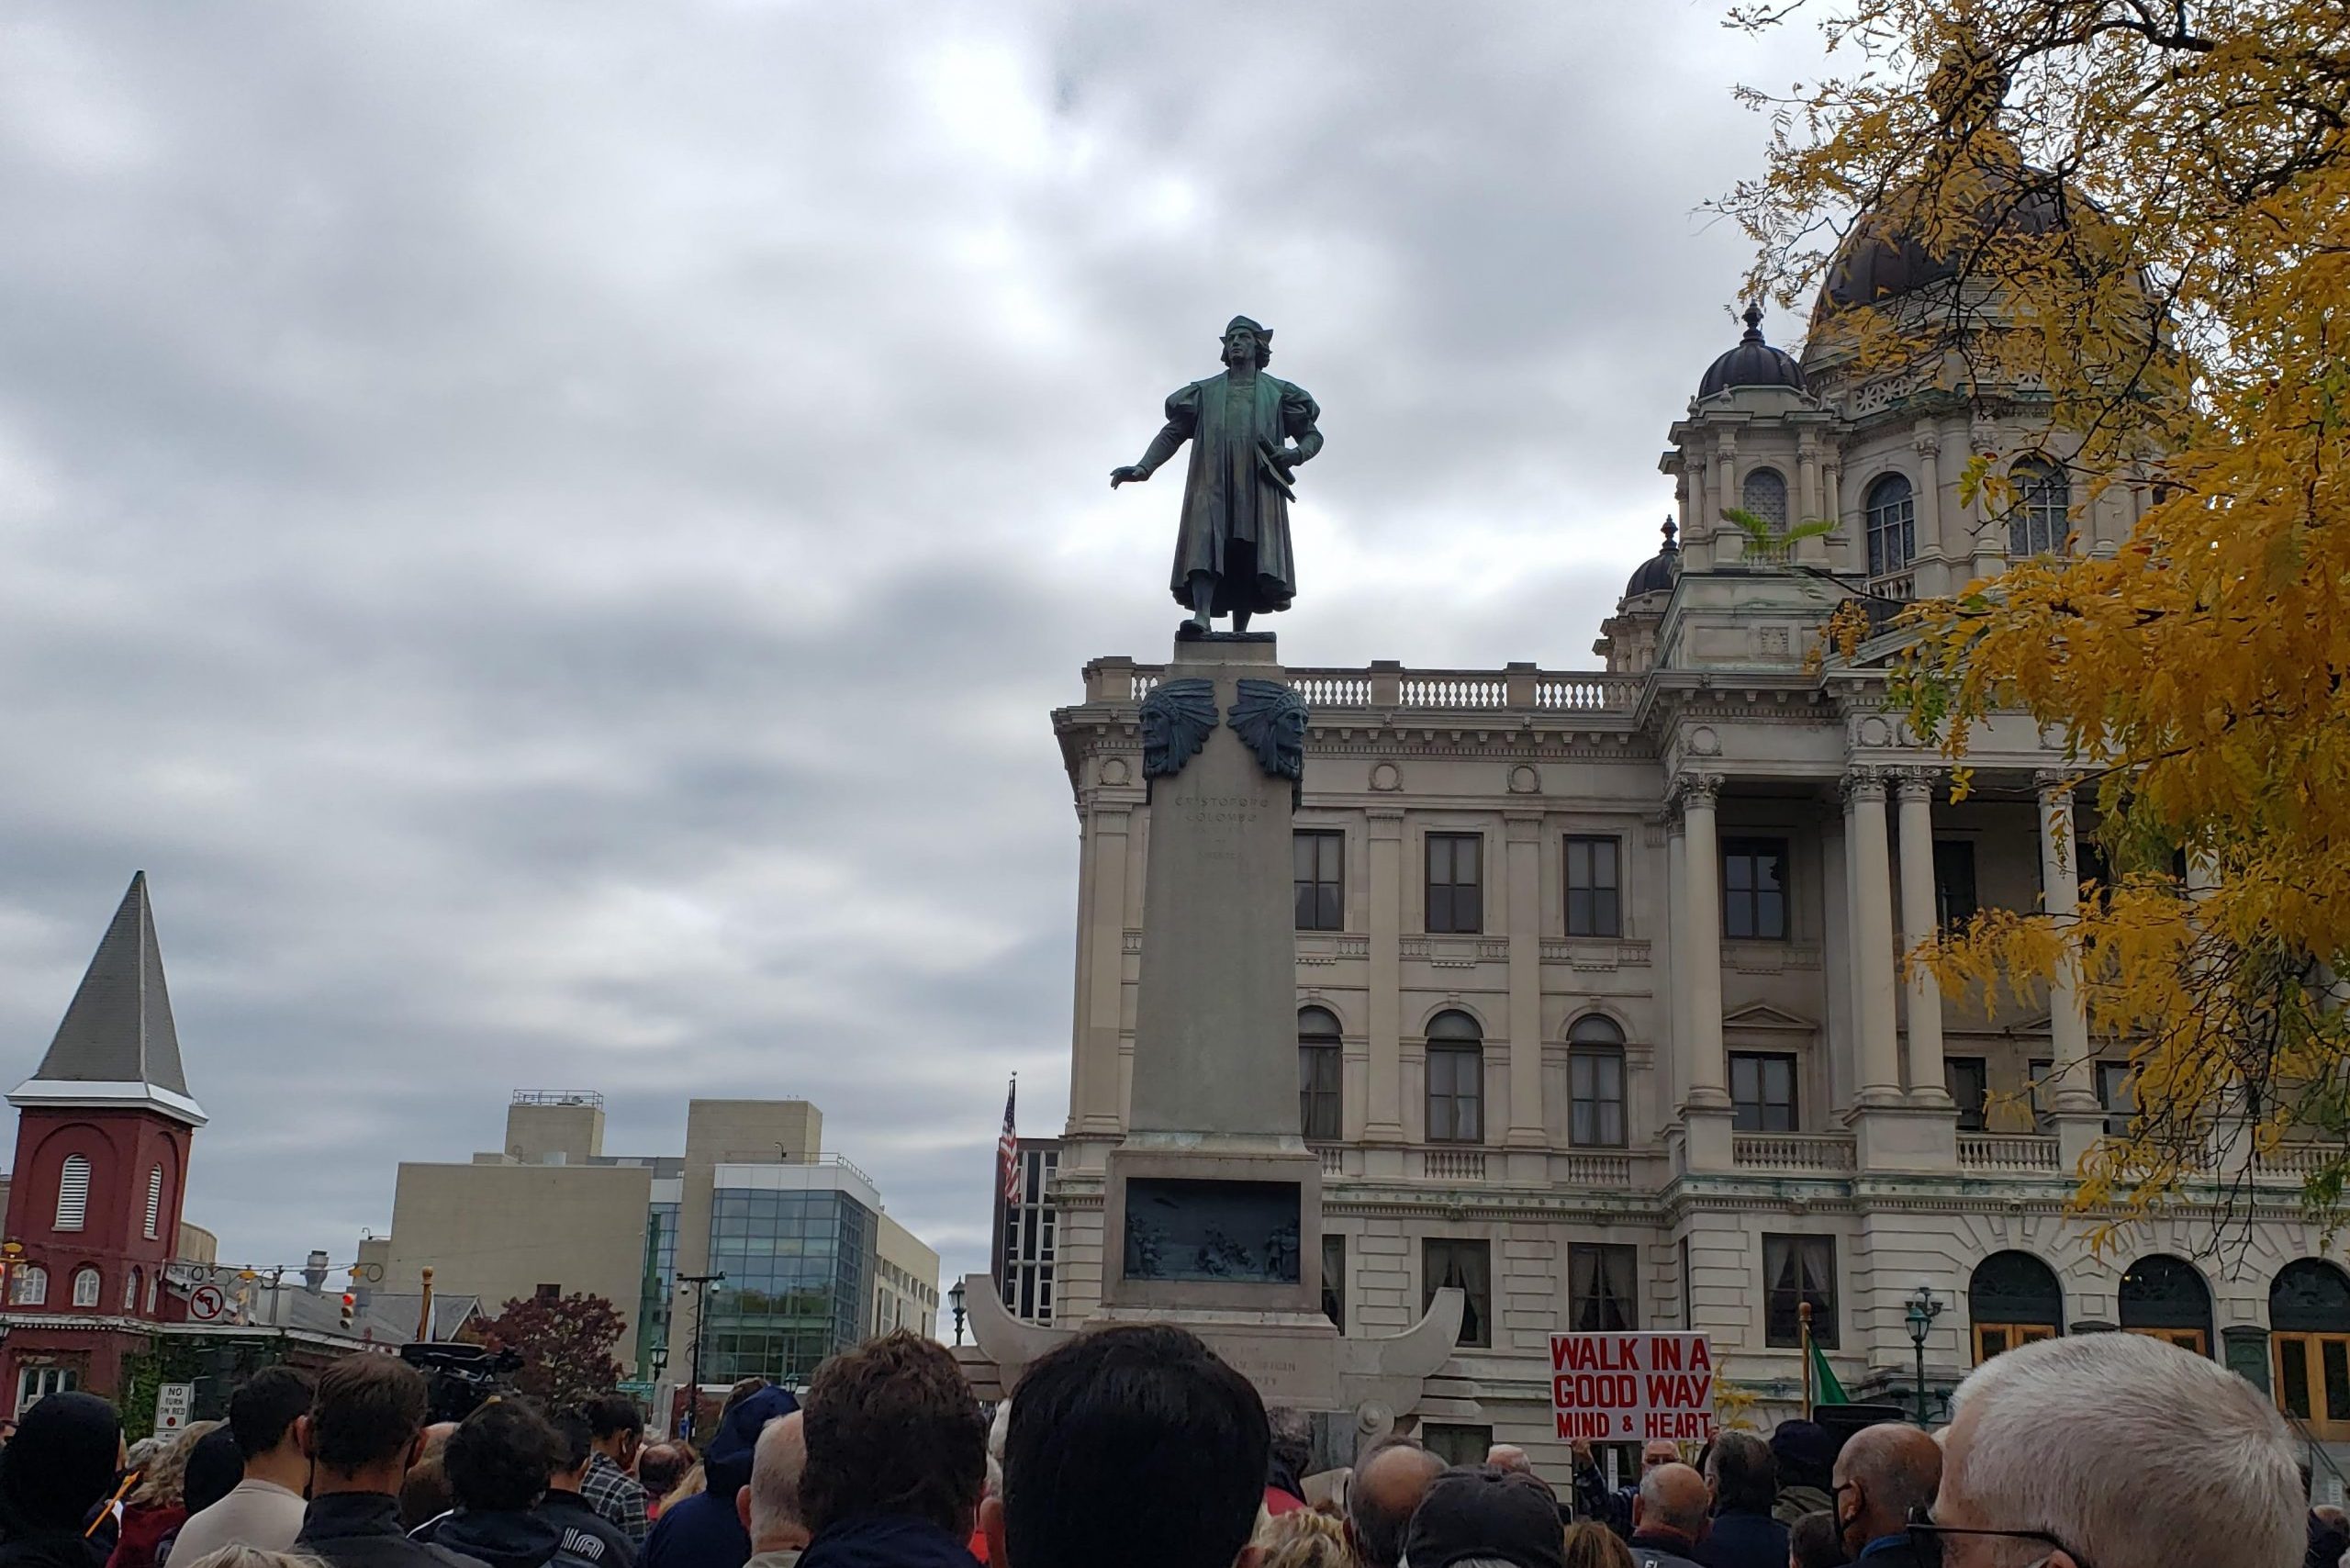 Syracuse residents gather that Columbus Circle statue downtown for Columbus Day/Indigenous Peoples Day in October 2020